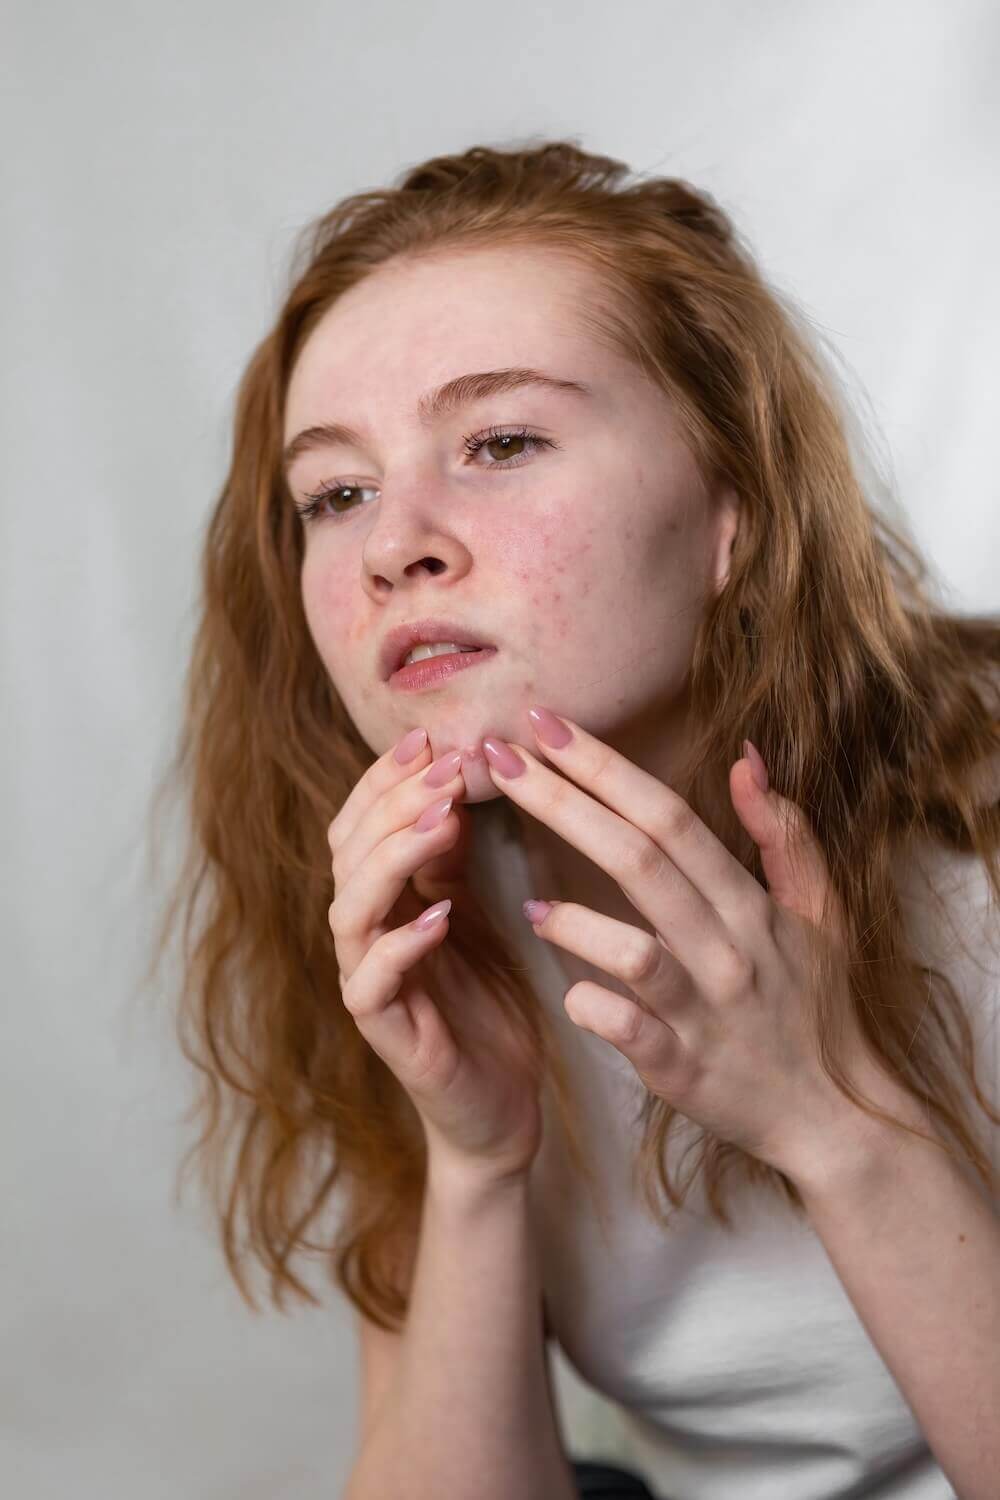 PCOS Sisters A woman with red hair is putting her hand on her face, possibly due to acne.